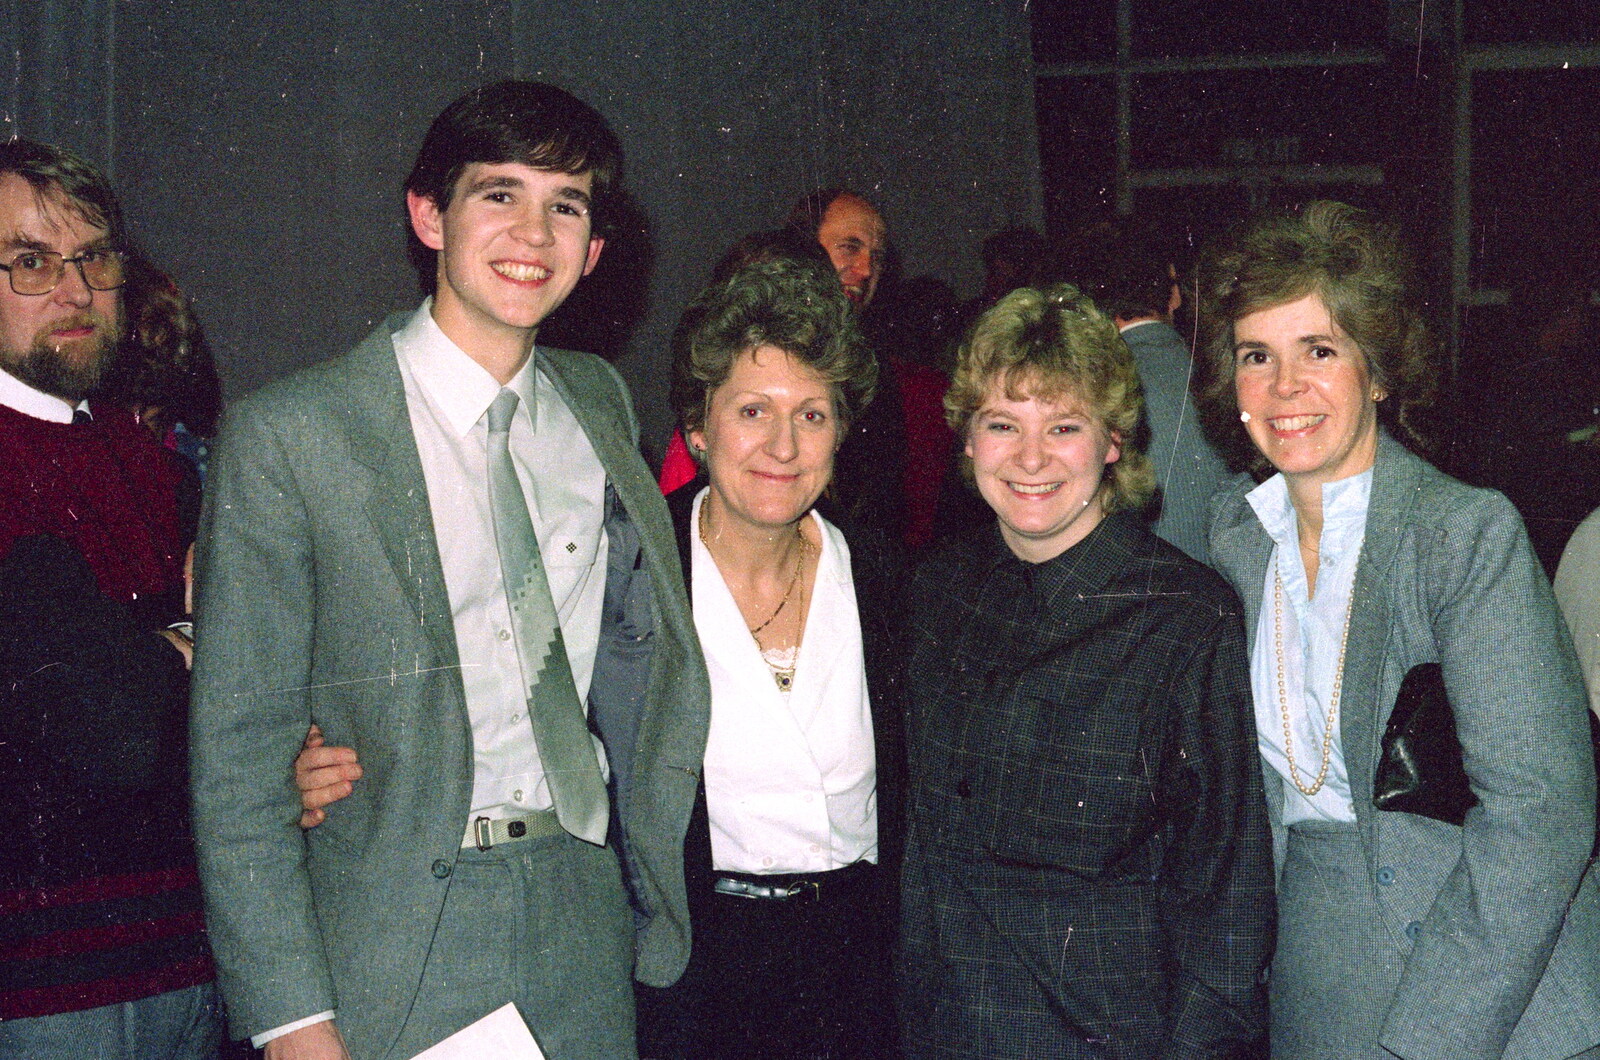 Phil, Anna and their mothers from Brockenhurst College Presentation and Christmas, Hampshire - 19th December 1985